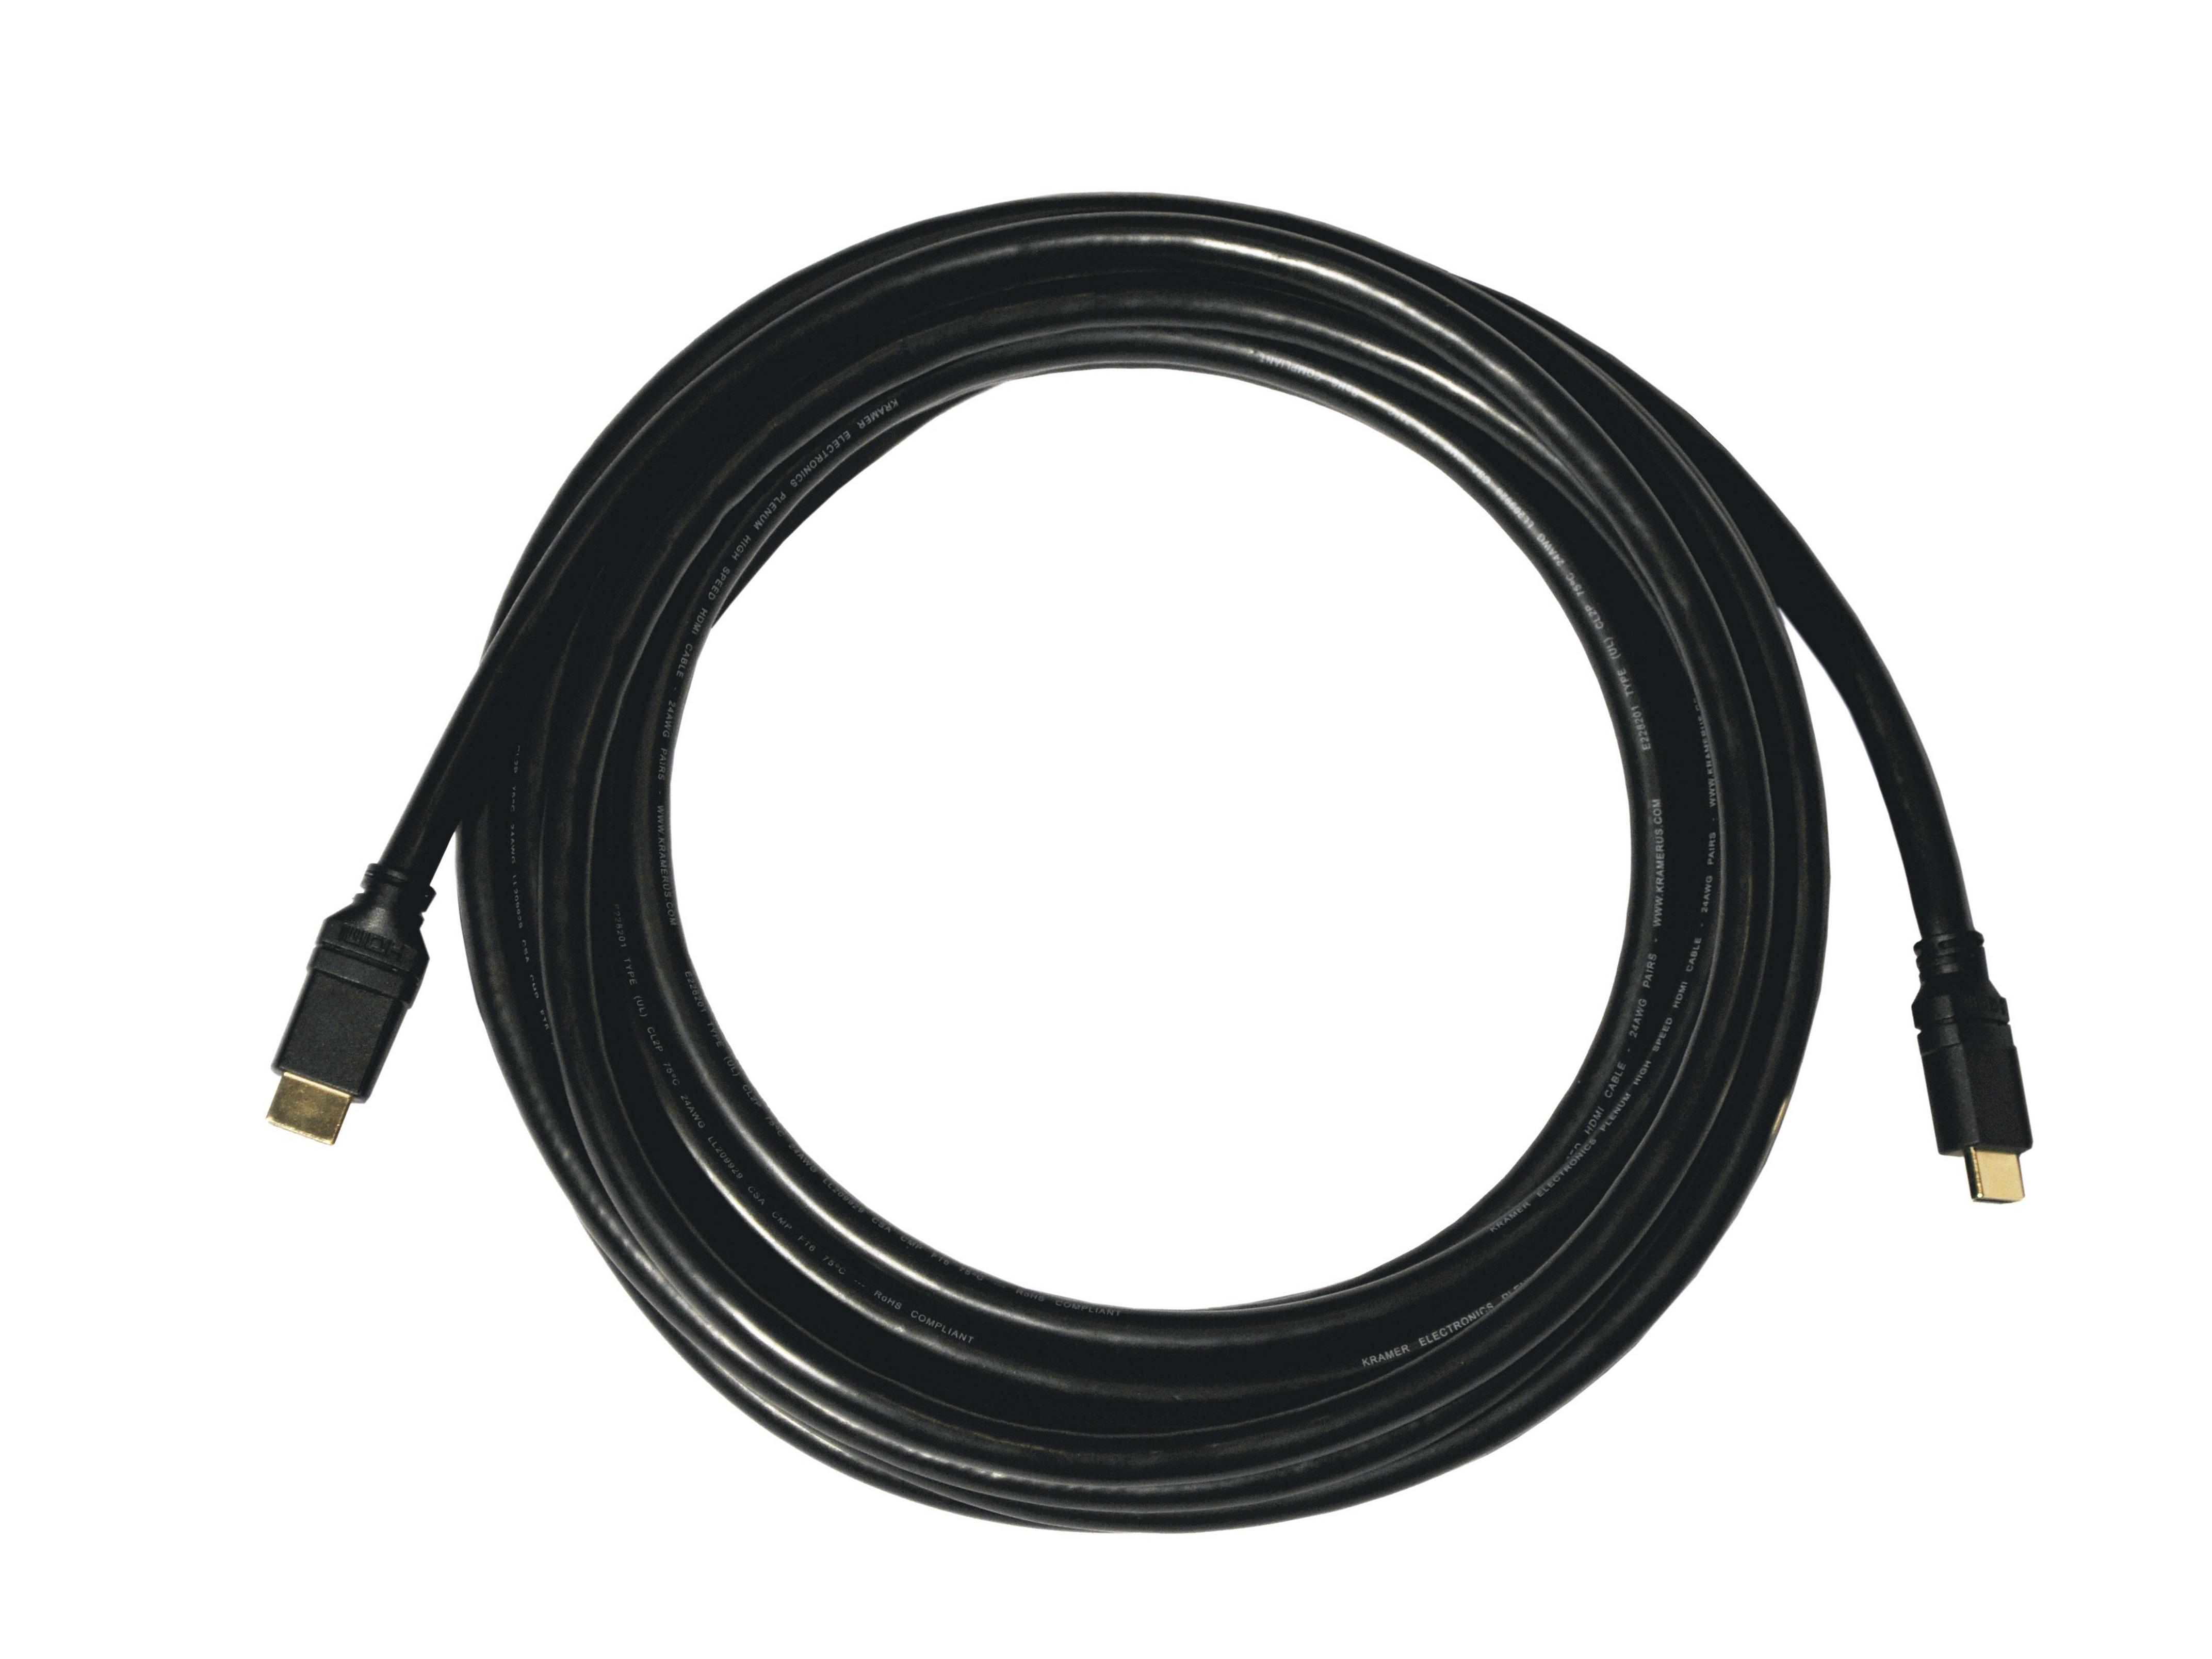 CP-HM/HM/ETH-45 45ft HDMI (M) to HDMI (M) Plenum Rated Cable with Ethernet by Kramer